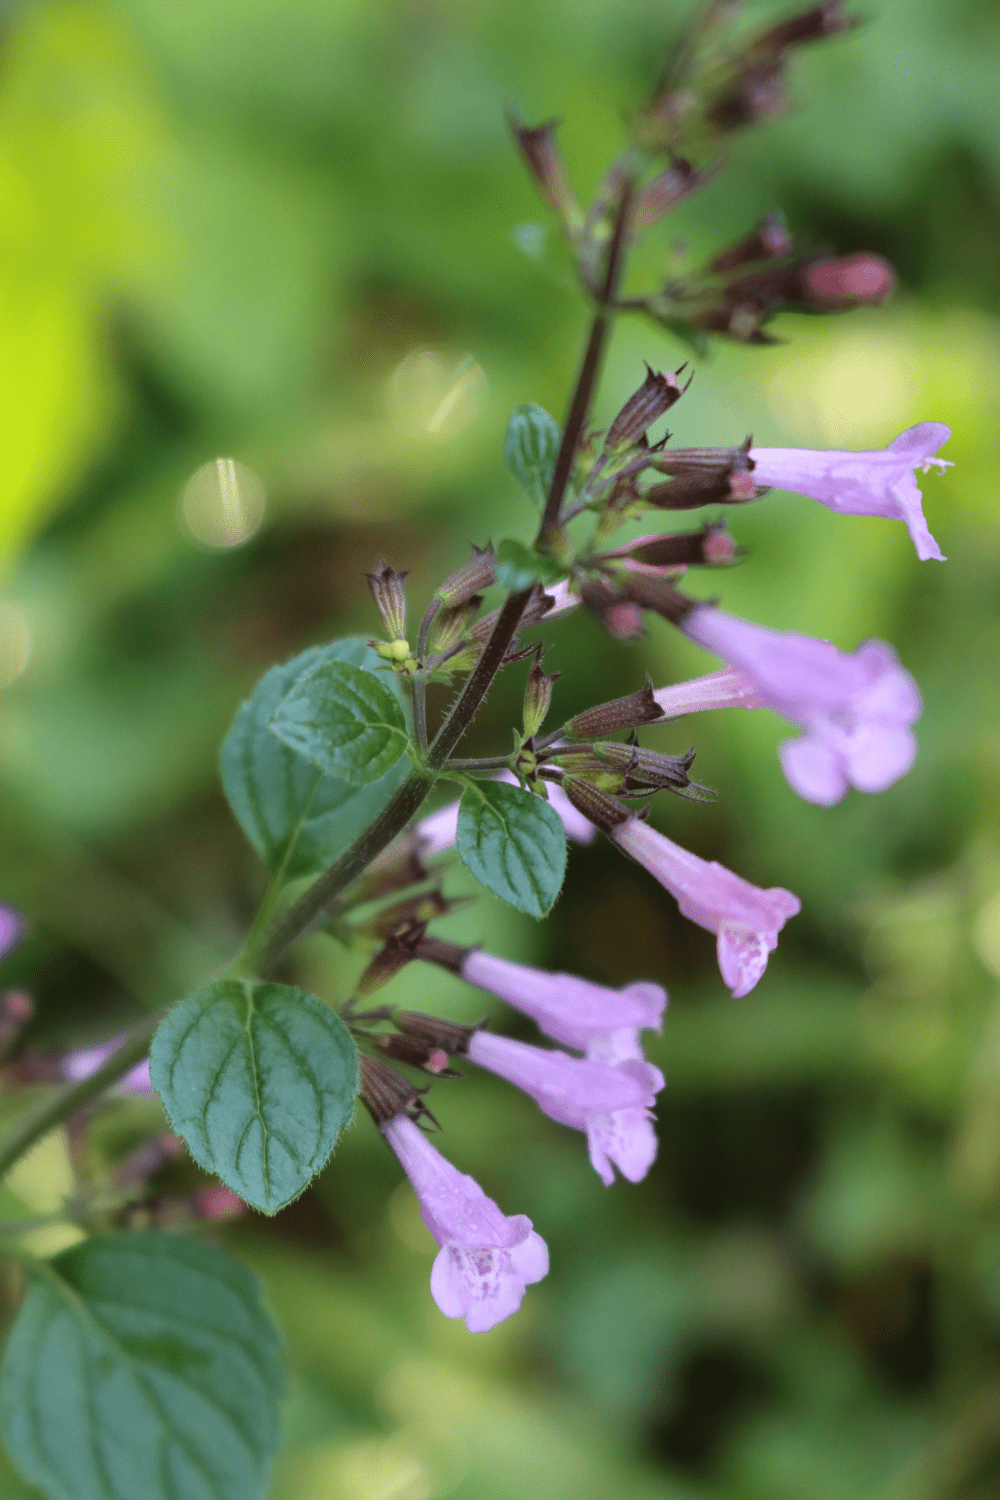 A picture of skullcap flowers.